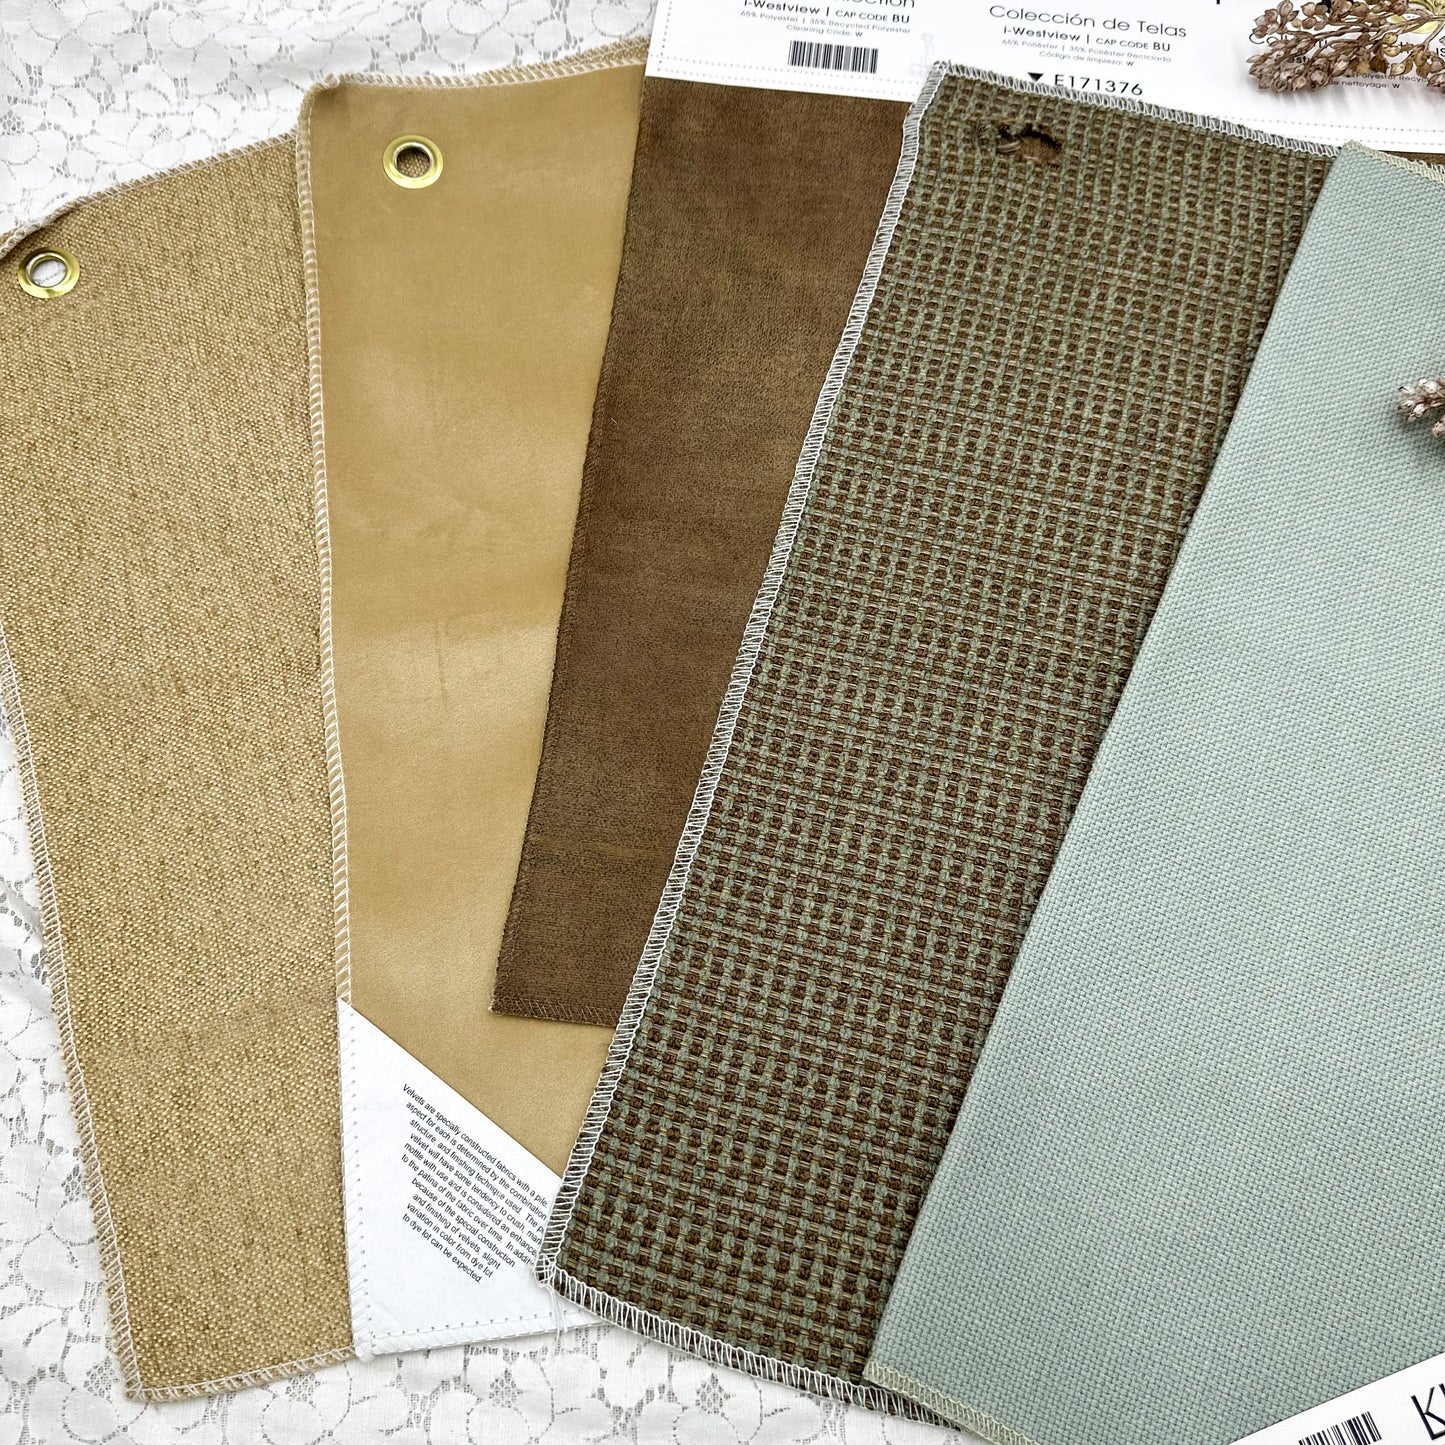 Upholstery Fabric Samples with Hangers (set of 5)